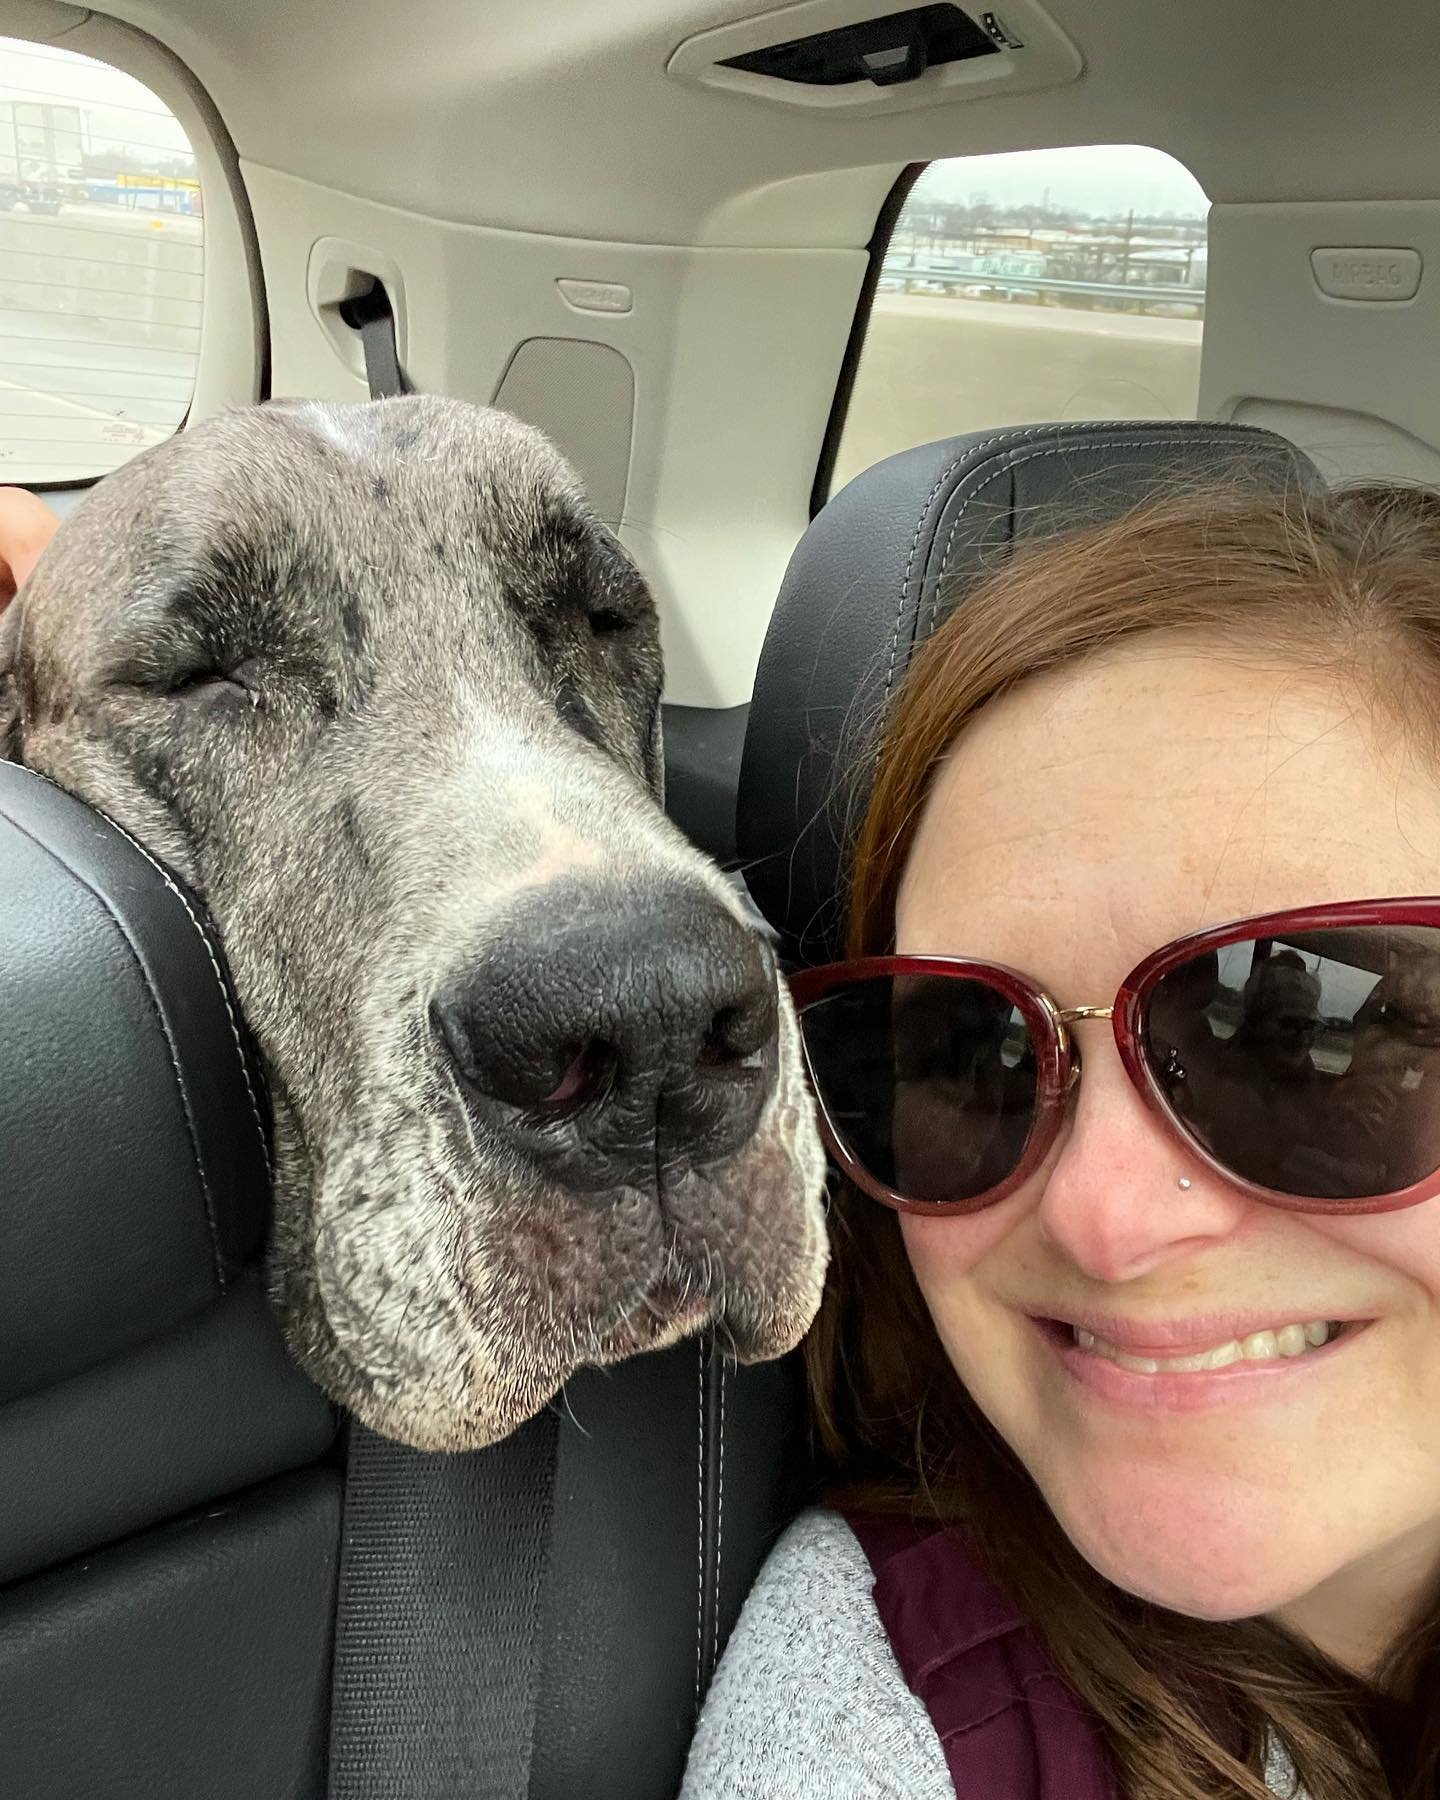 brittany taking a selfie with zeus. she's wearing sunglasses and they're sitting in a car.